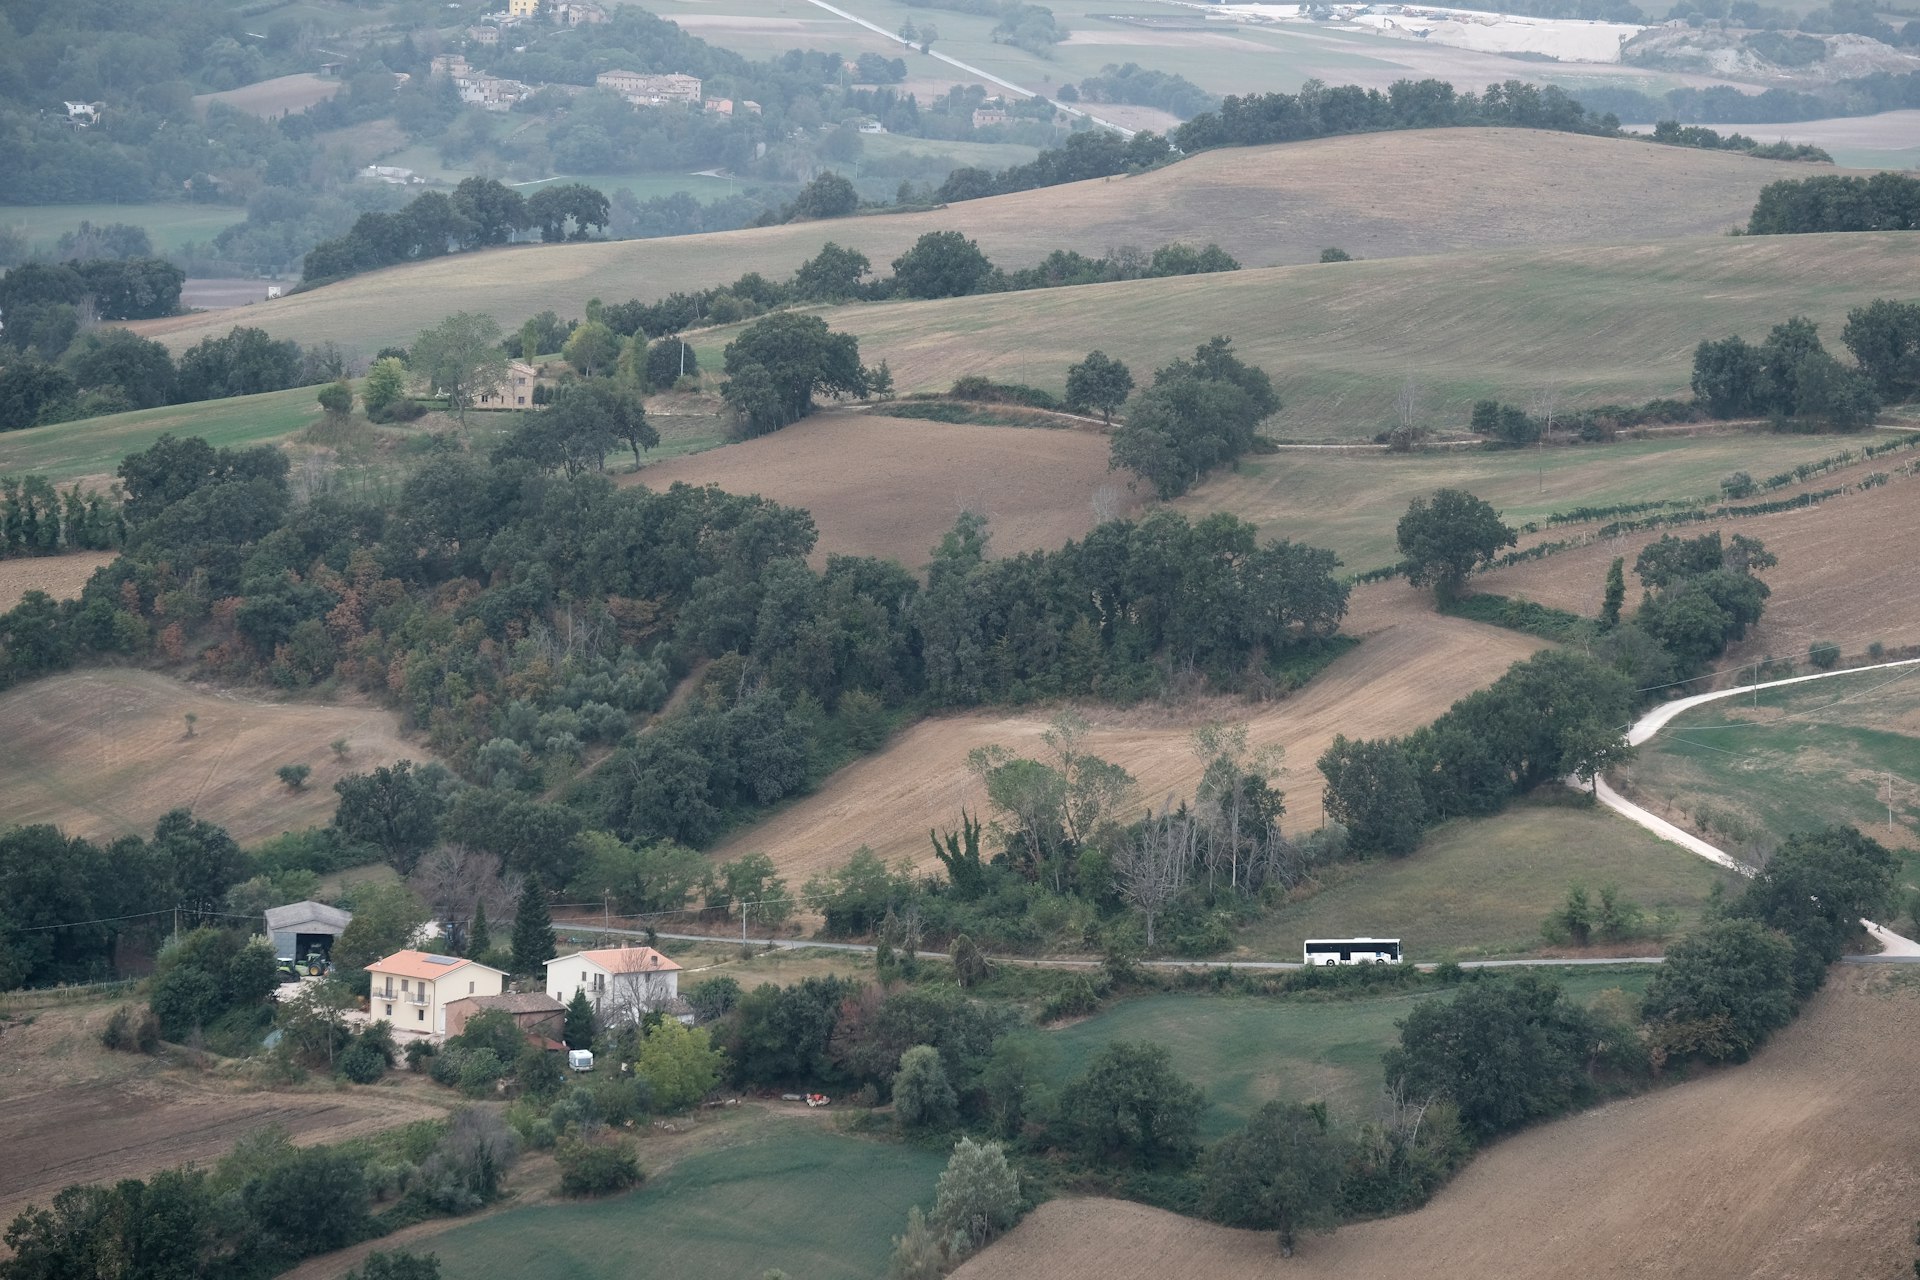 Local buses link the hilltop villages of Le Marche, Italy